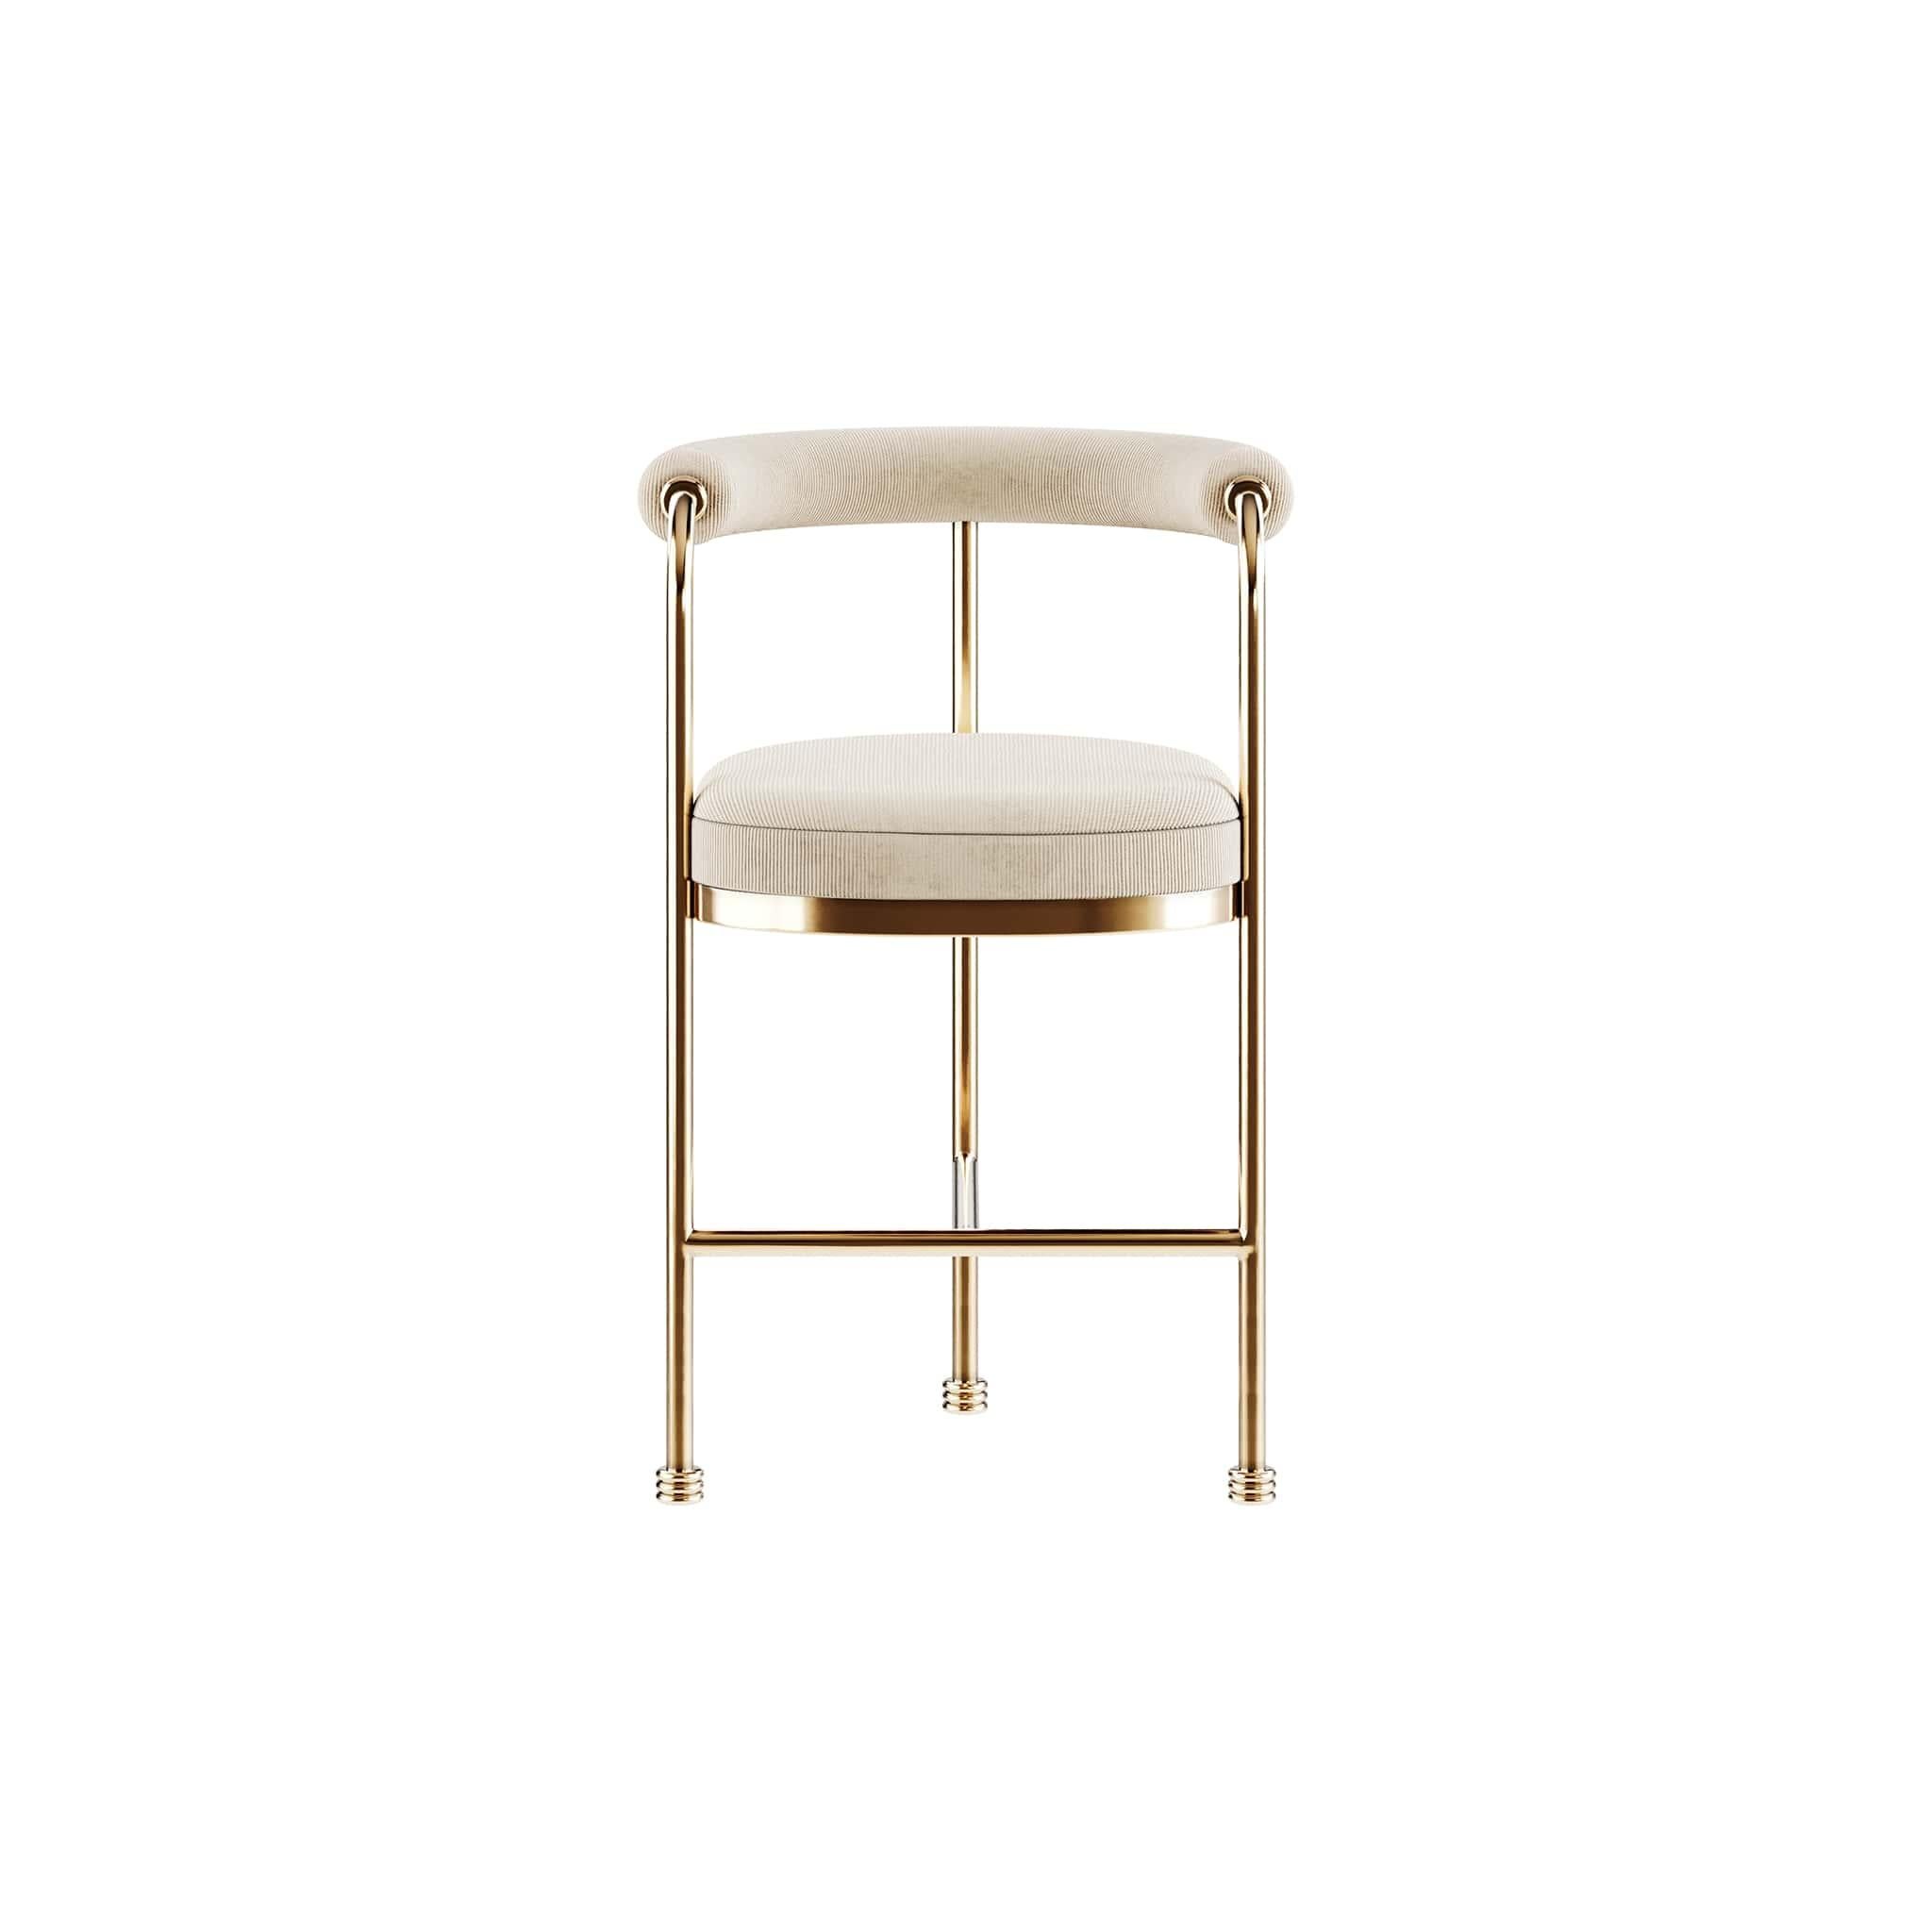 Limited Edition: Modern Counter Stool Gold Polished Brass Corduroy Upholstery

Joanne Counter Stool is a mid-century modern bar stool. This simple and elegant bar seating feels better than a Martini on a weekday and is unmissable on a luxe front